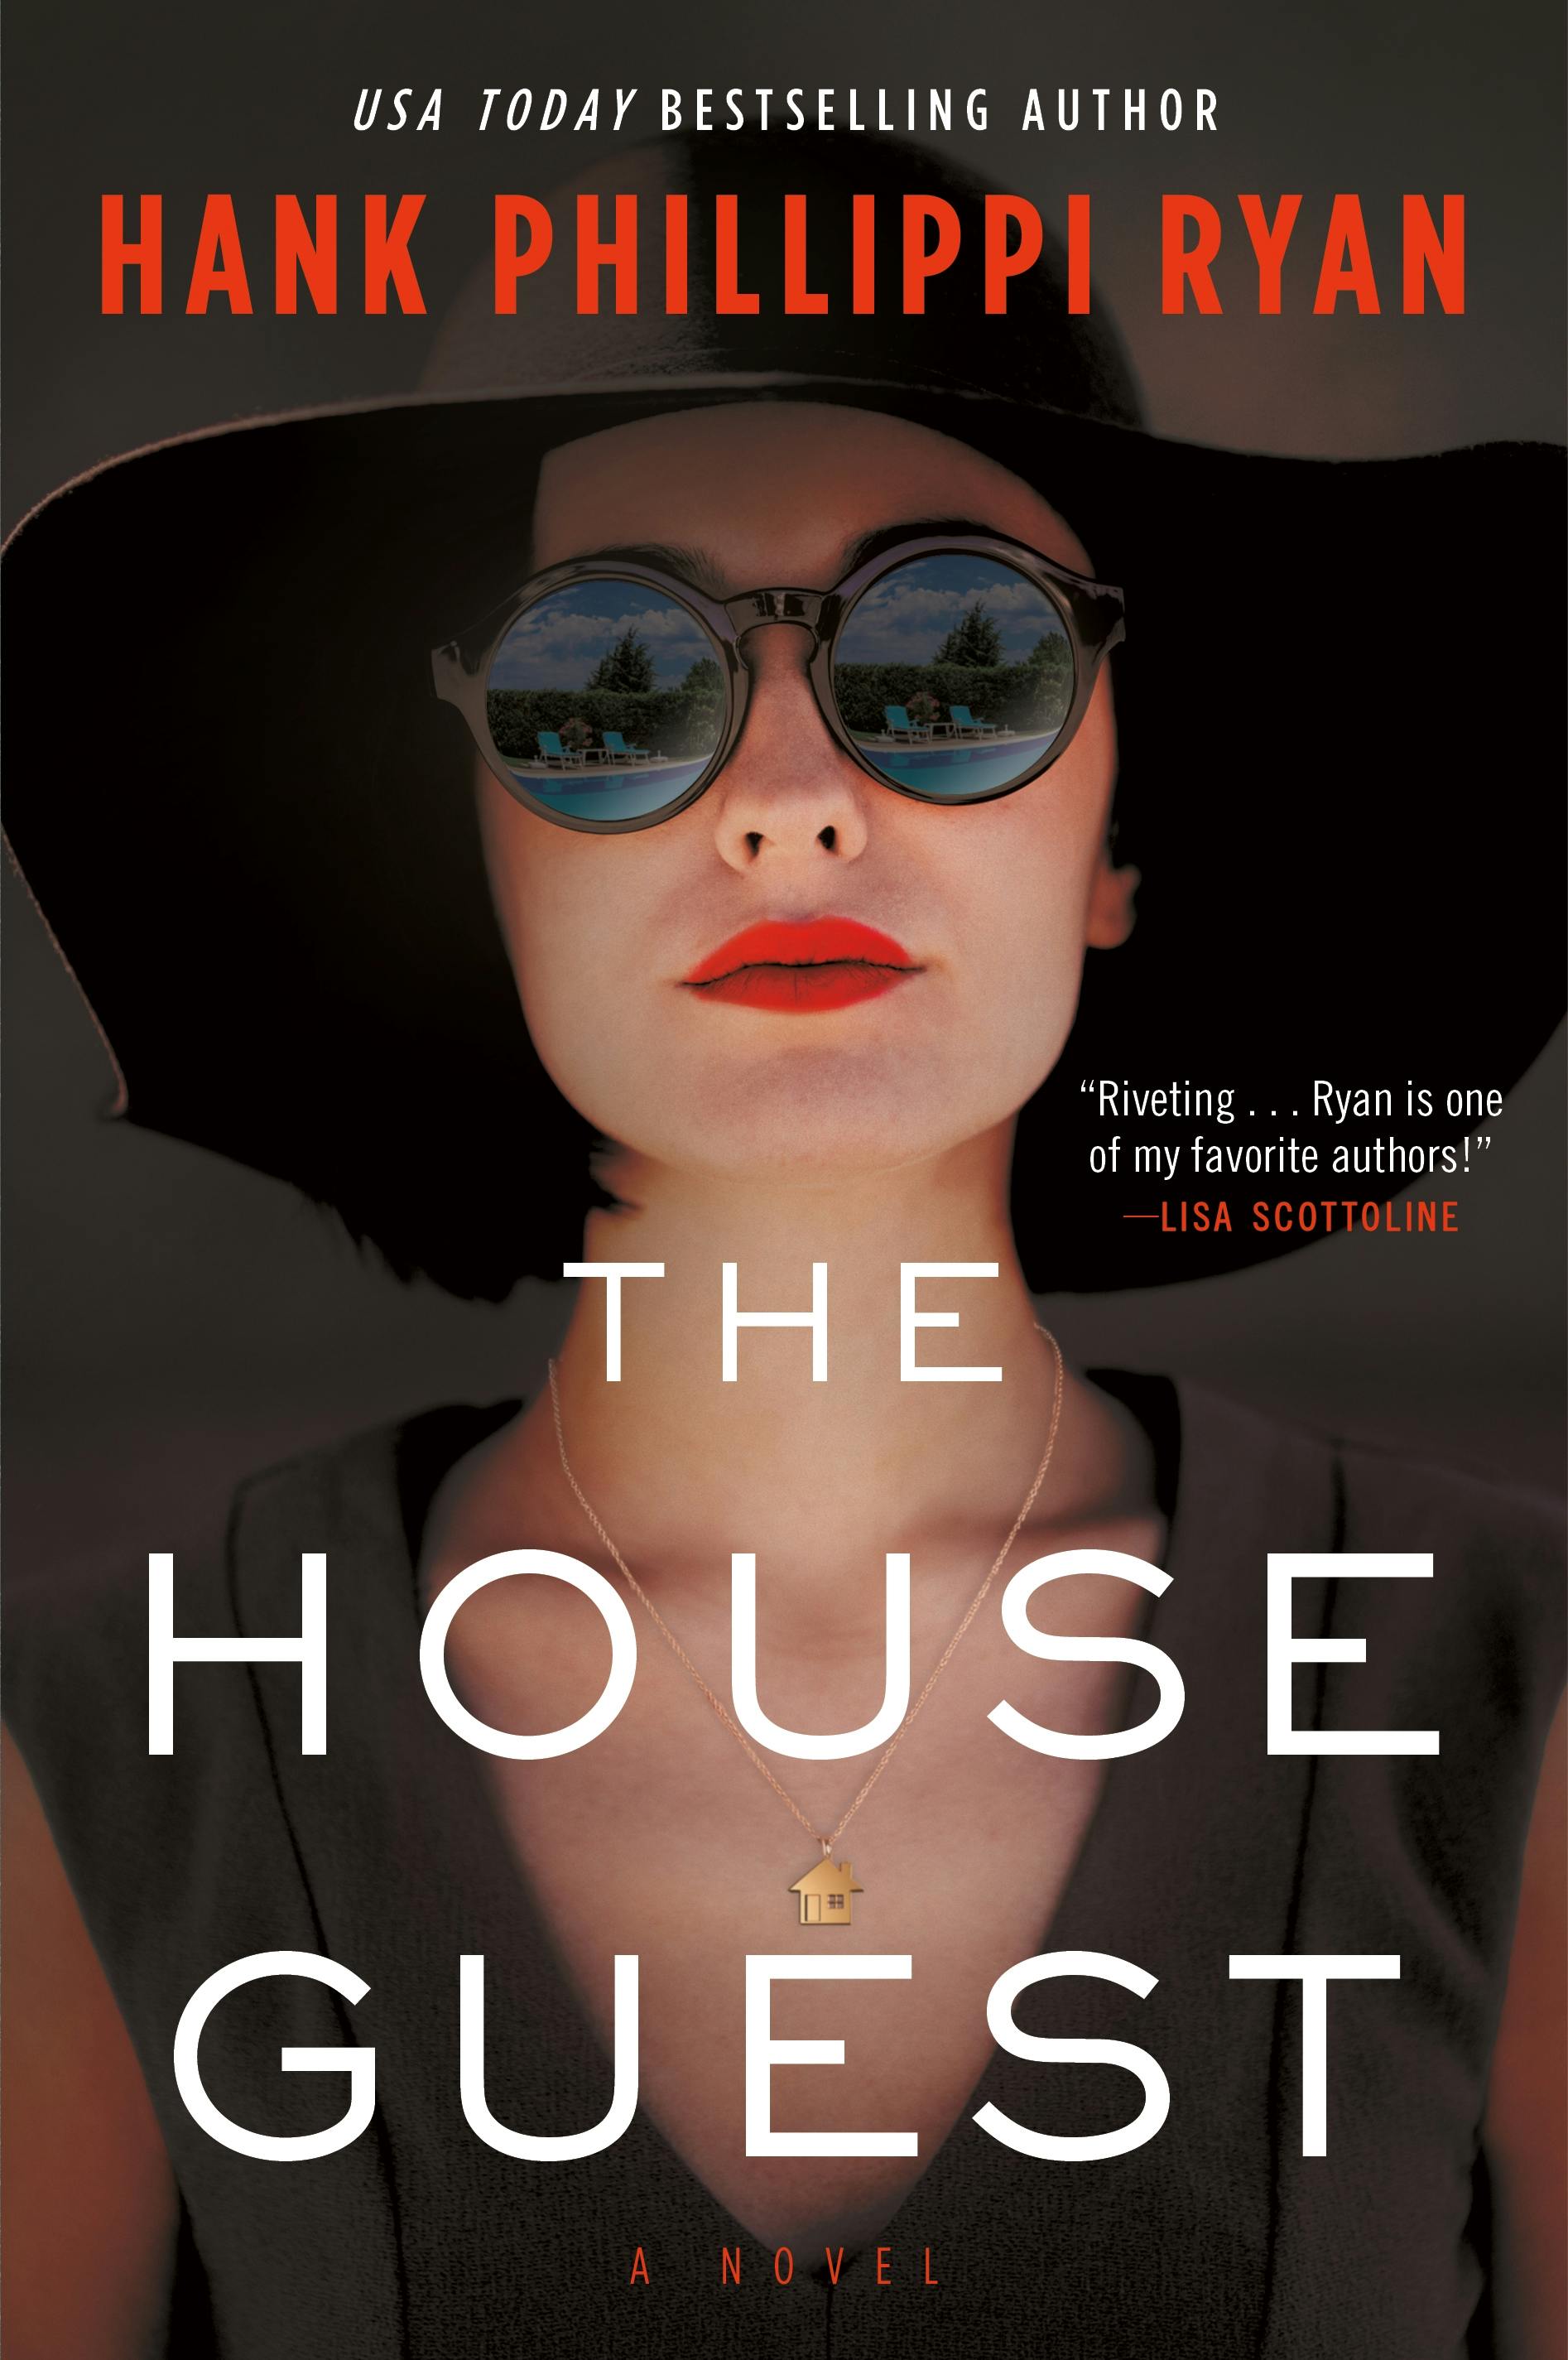 Cover for the book titled as: The House Guest